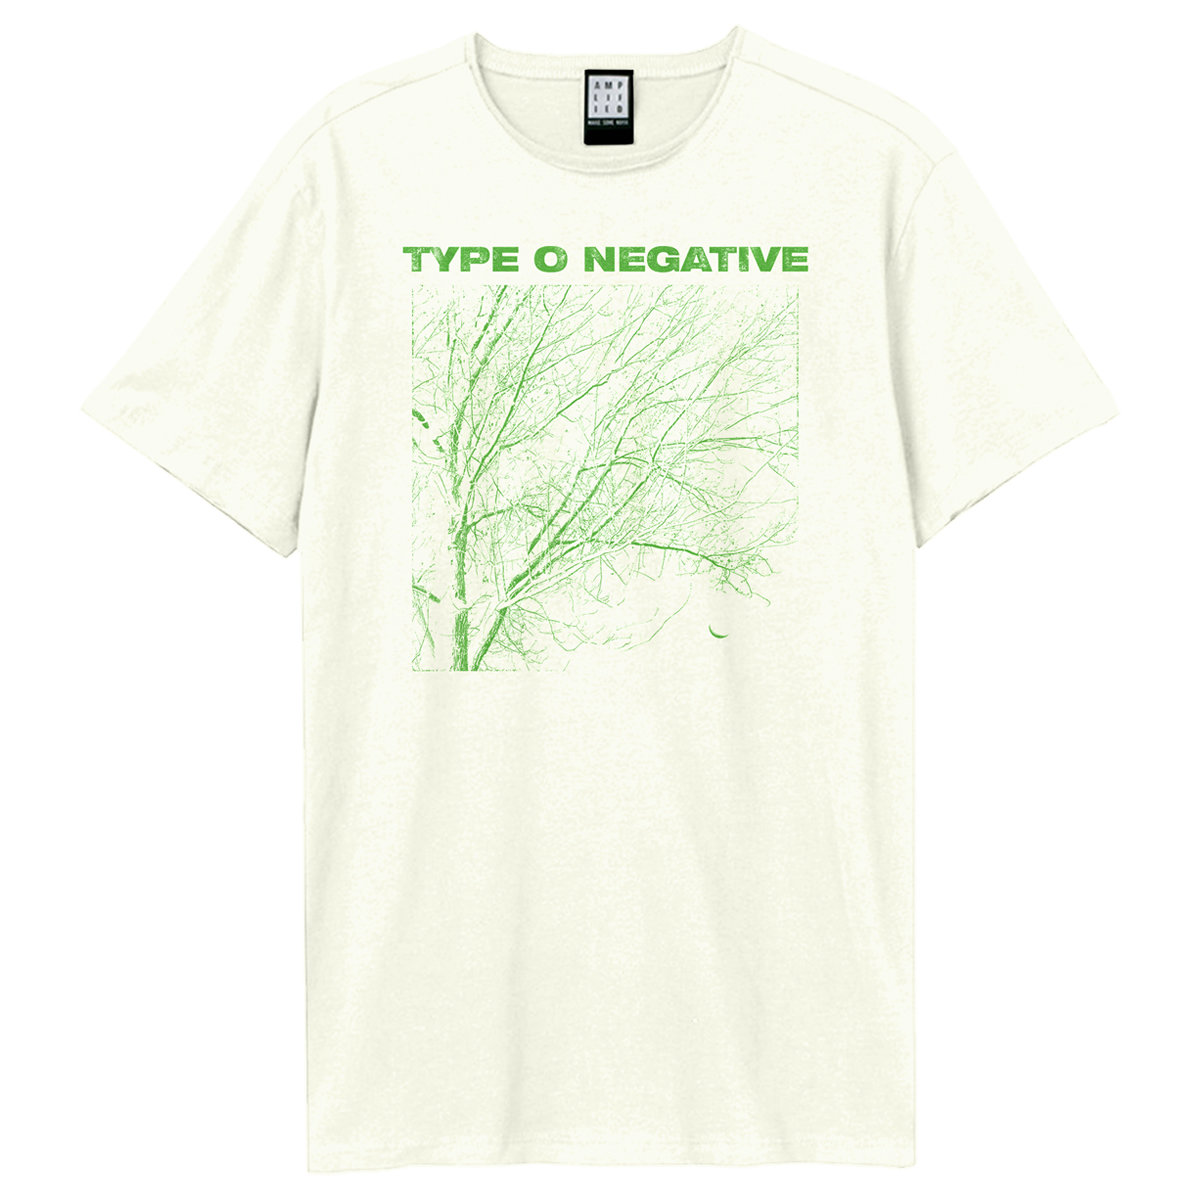 https://www.amplifiedclothing.com/uploads/images/products/verylarge/amplified_typeonegative_typeonegativegreentree_1688635997TypeONegativeGreenTreevw.jpg